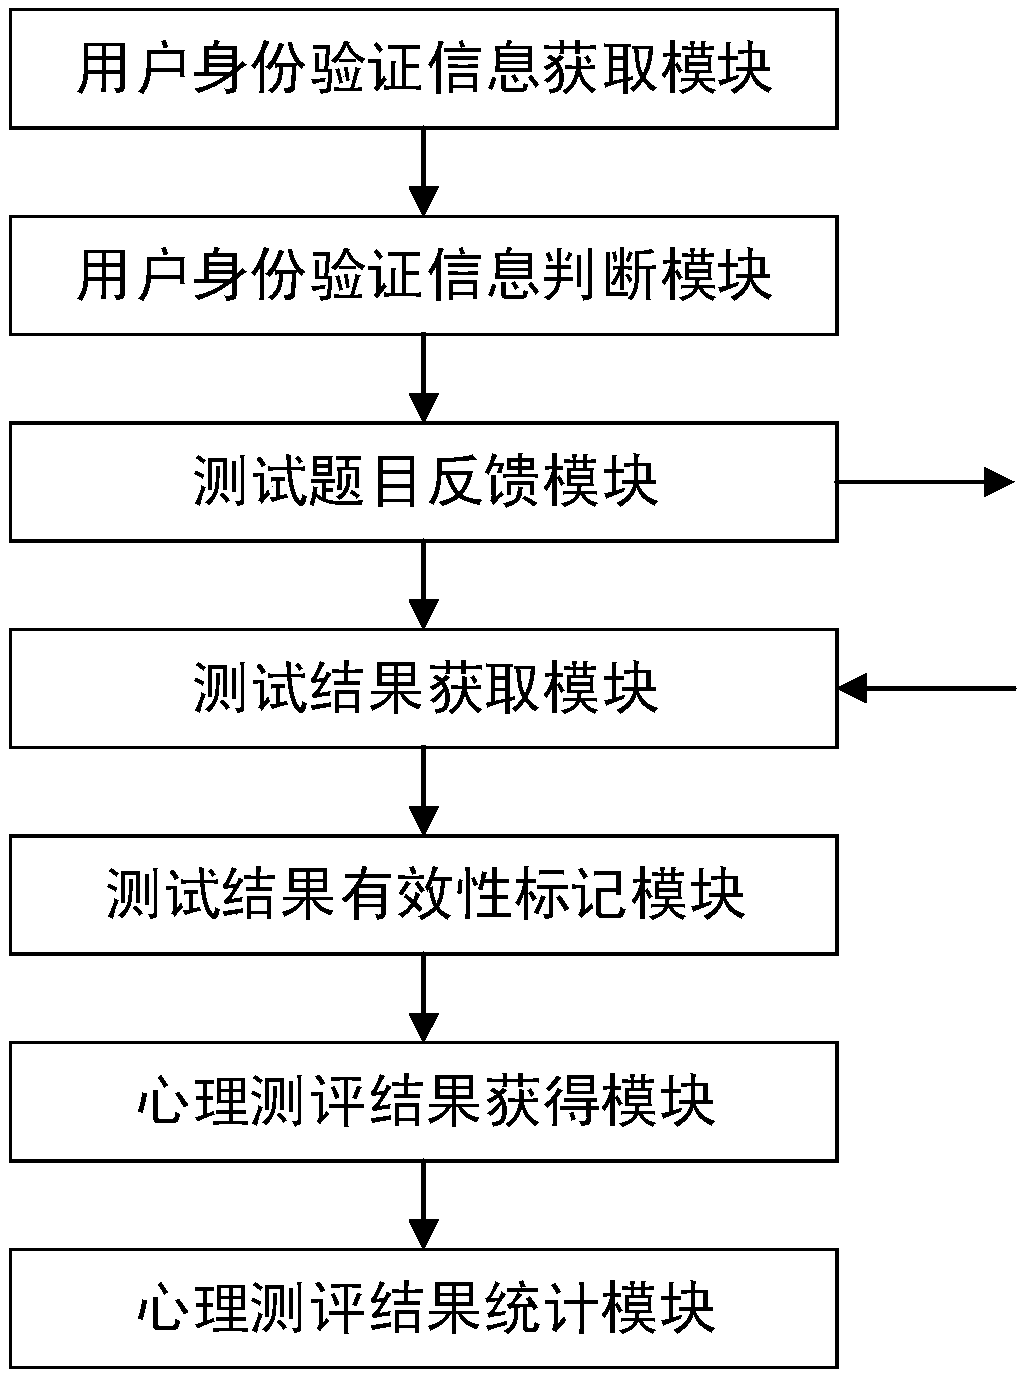 Group psychological assessment method, apparatus and system